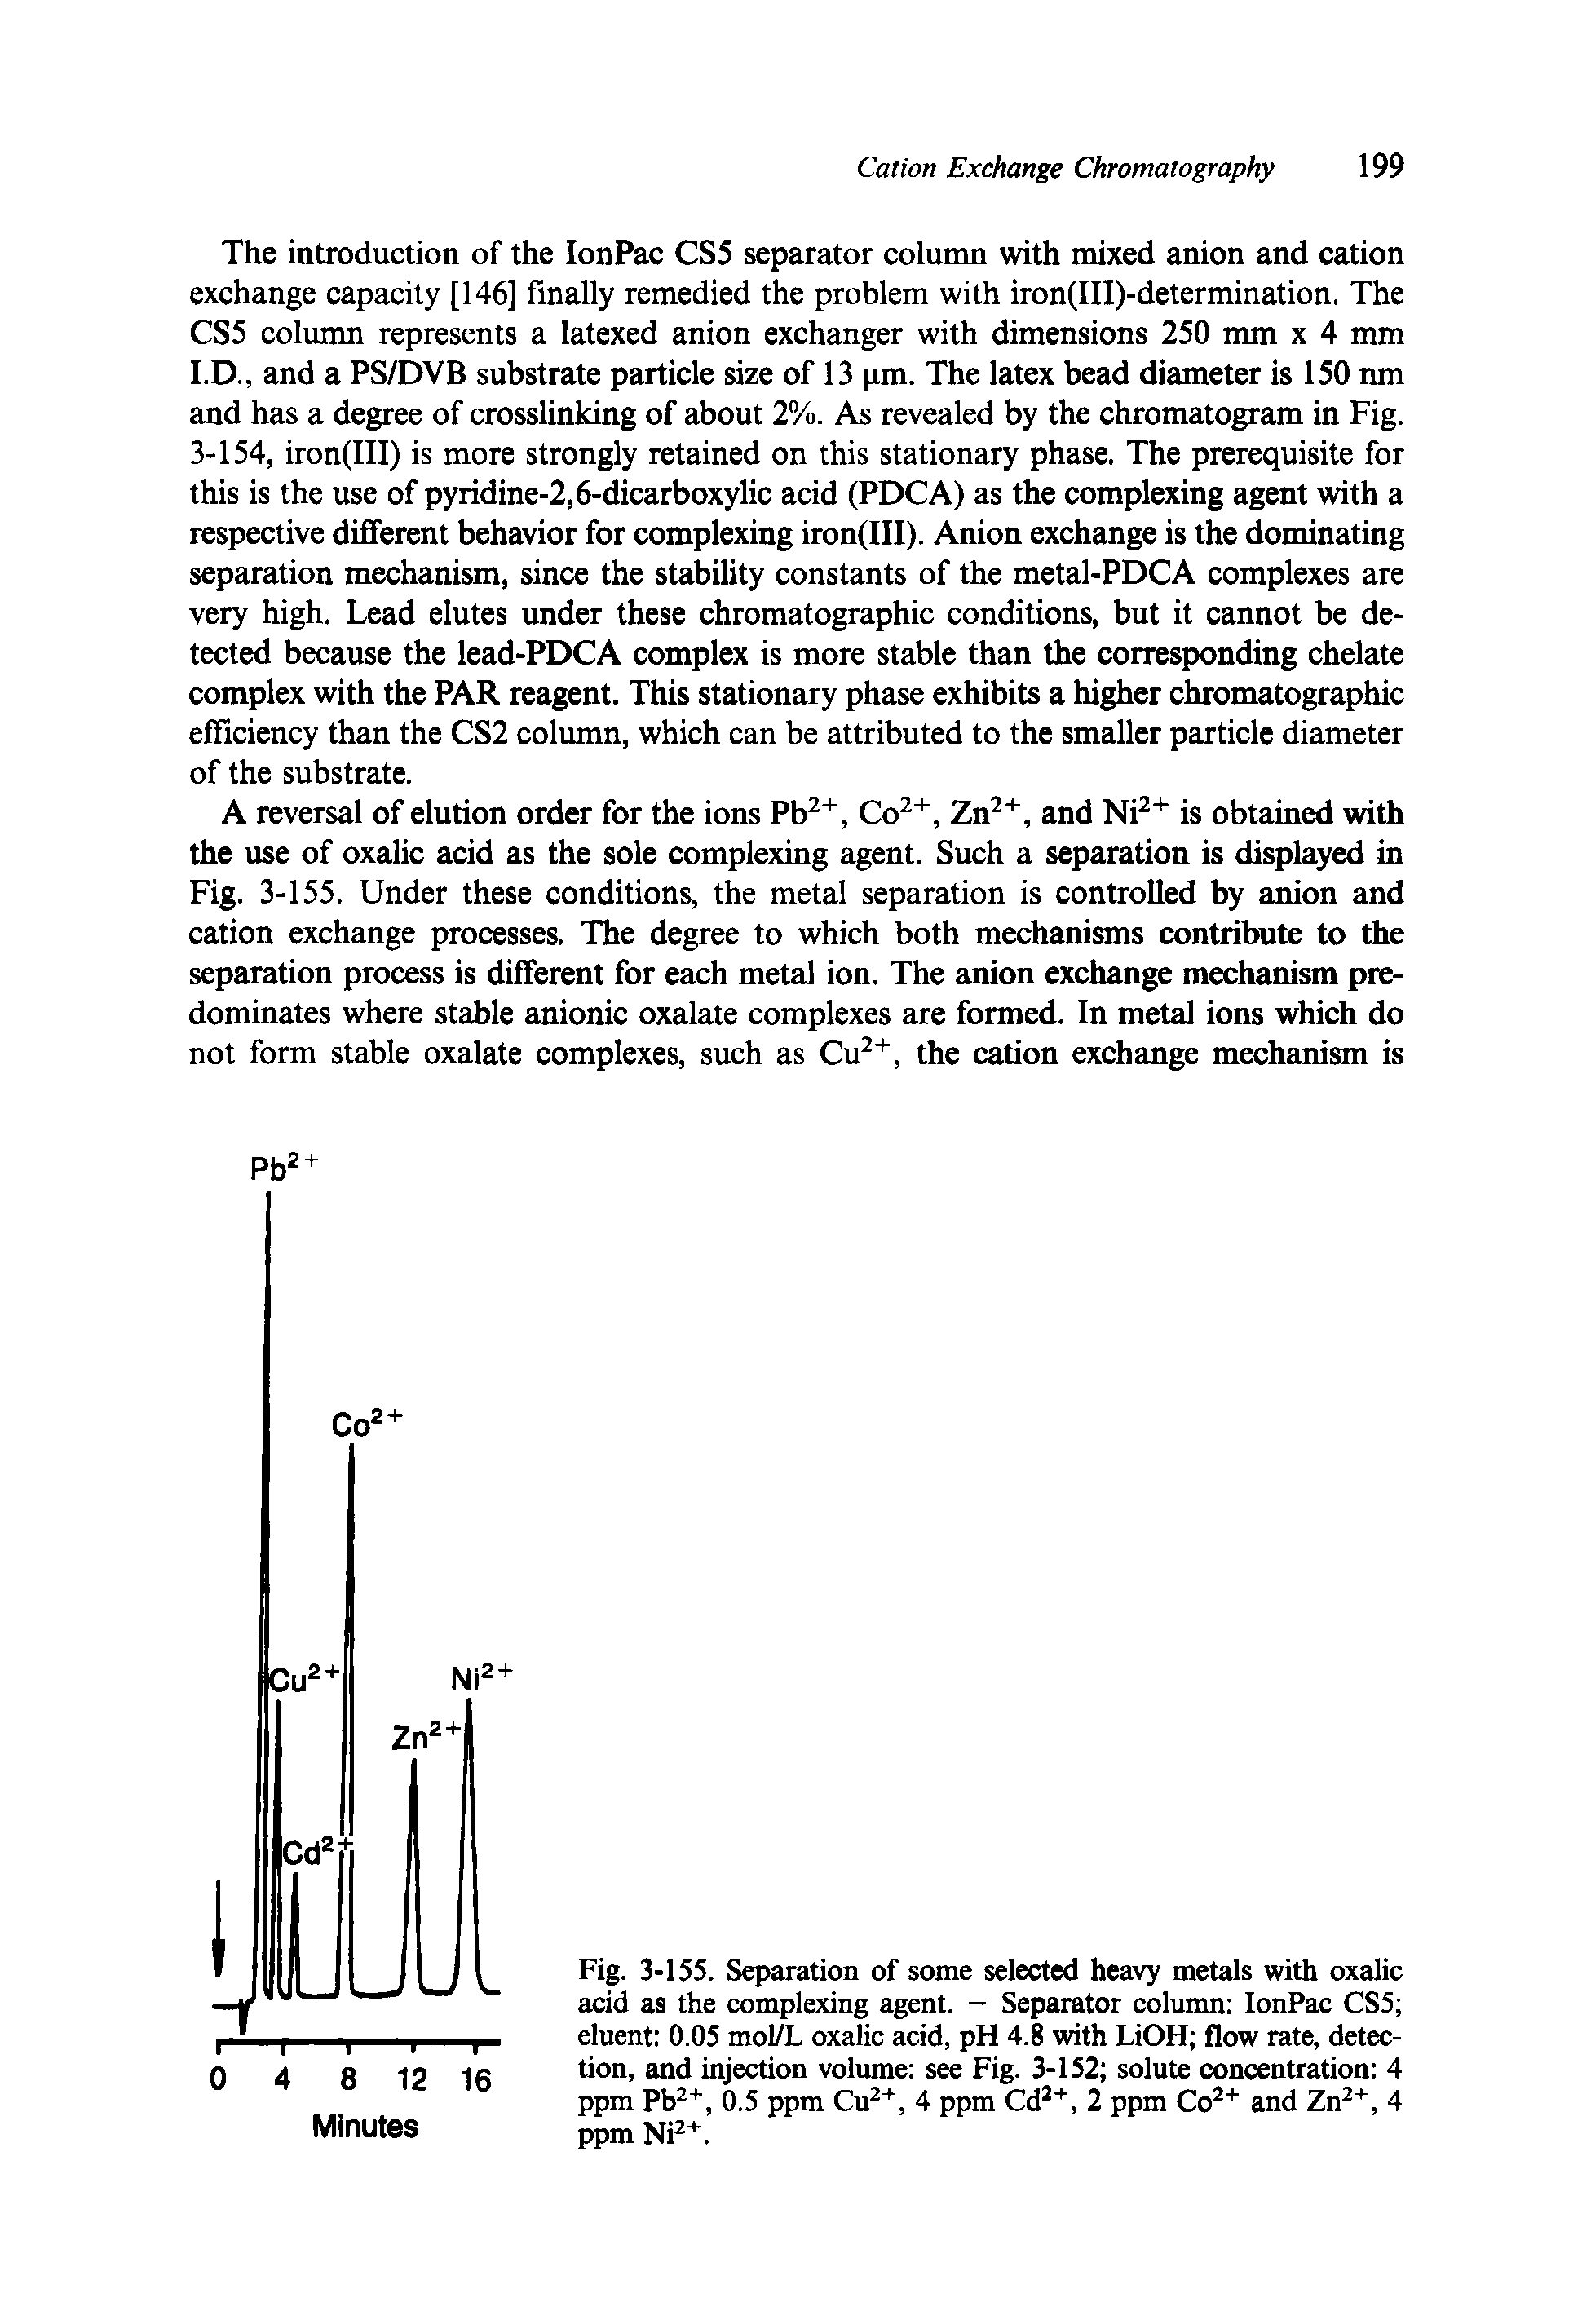 Fig. 3-155. Separation of some selected heavy metals with oxalic acid as the complexing agent. - Separator column IonPac CS5 eluent 0.05 mol/L oxalic acid, pH 4.8 with LiOH flow rate, detection, and injection volume see Fig. 3-152 solute concentration 4 ppm Pb2+, 0.5 ppm Cu2+, 4 ppm Cd2+, 2 ppm Co2+ and Zn2+, 4 ppm Ni2+.